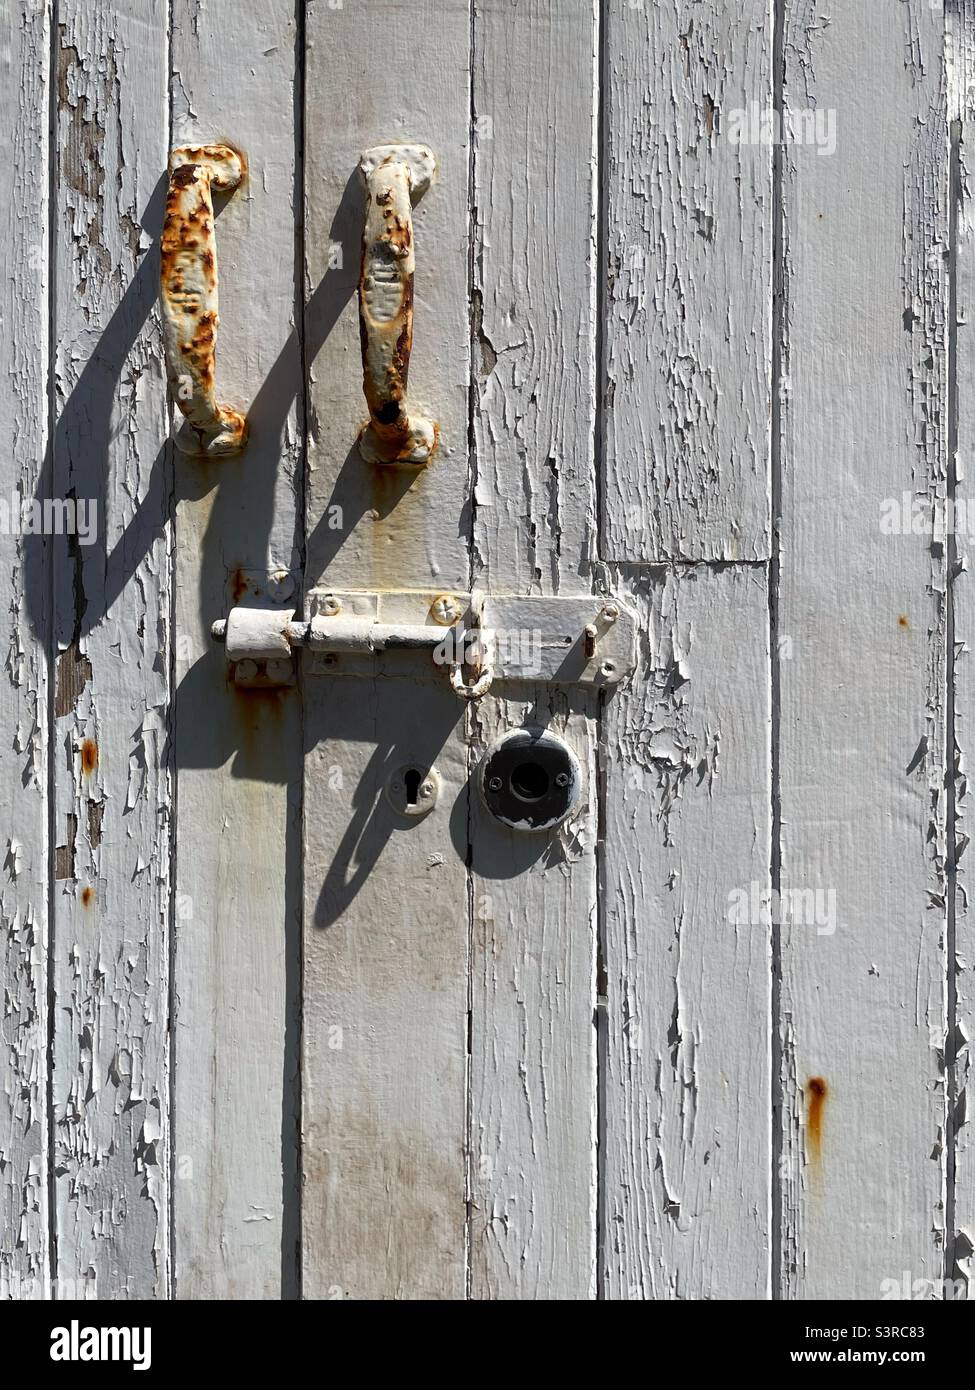 Old wooden door with flaking white paint and rusting handles and lock. Stock Photo